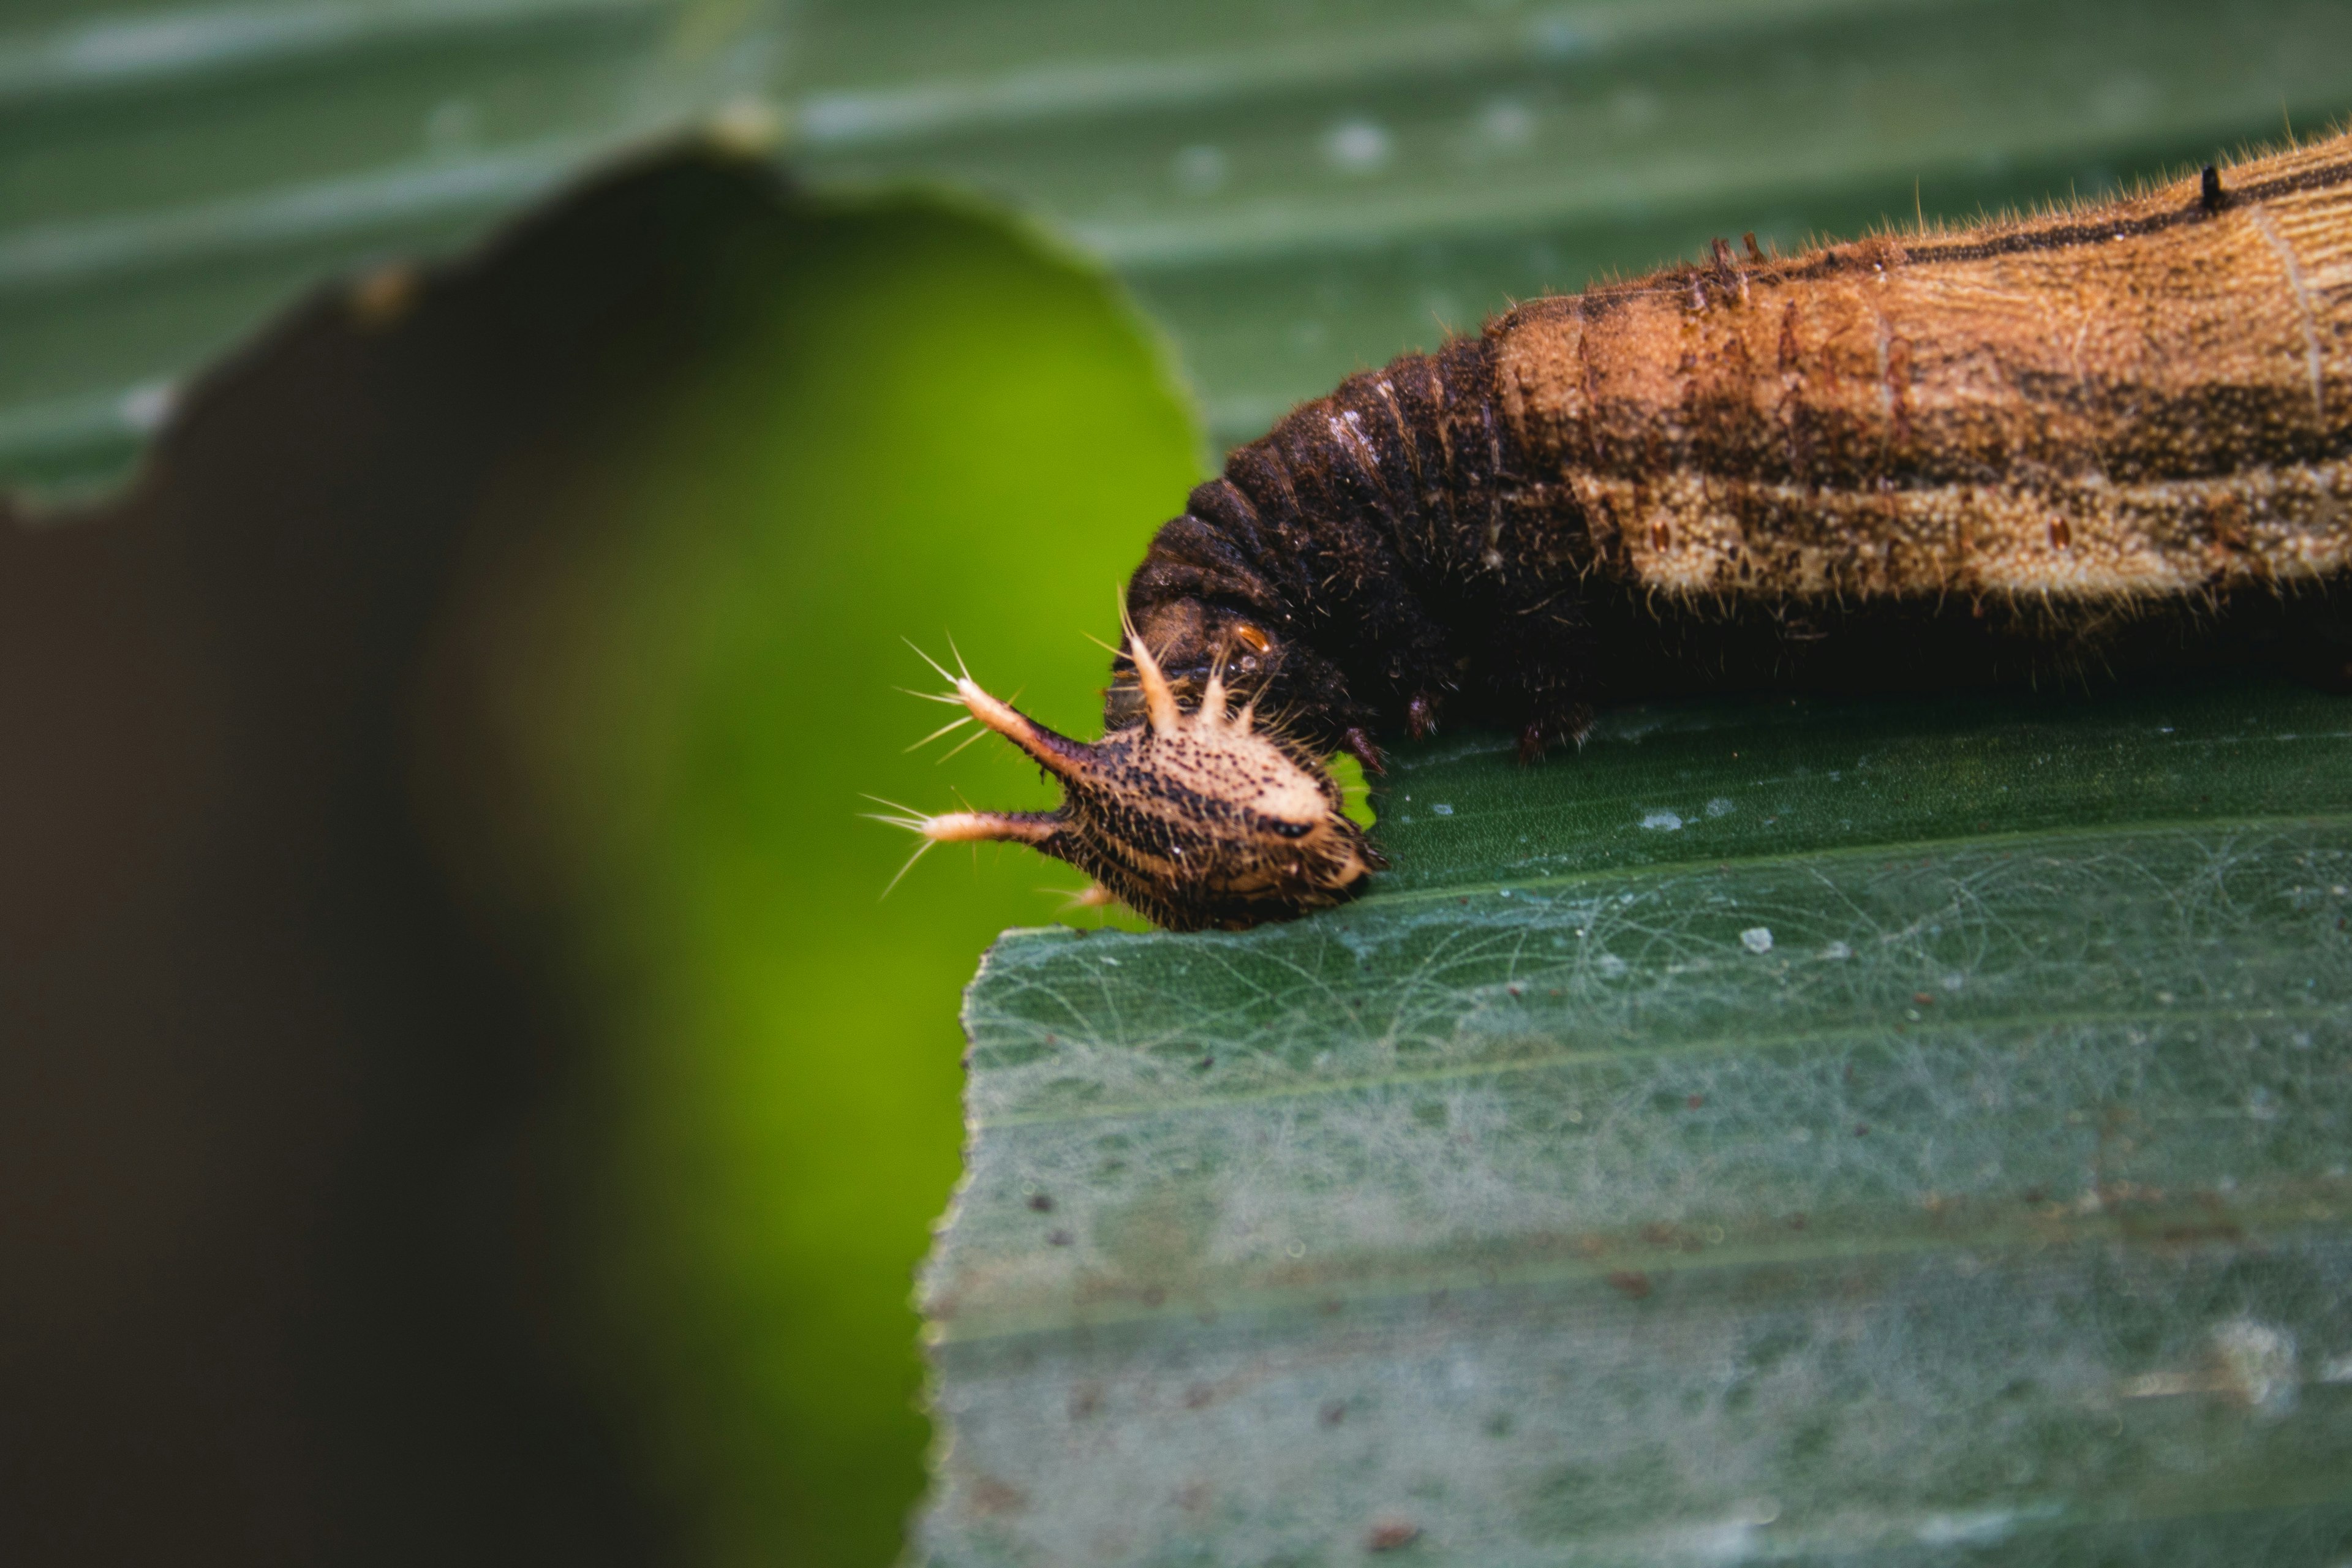 a caterpillar eating the leaf it is resting on